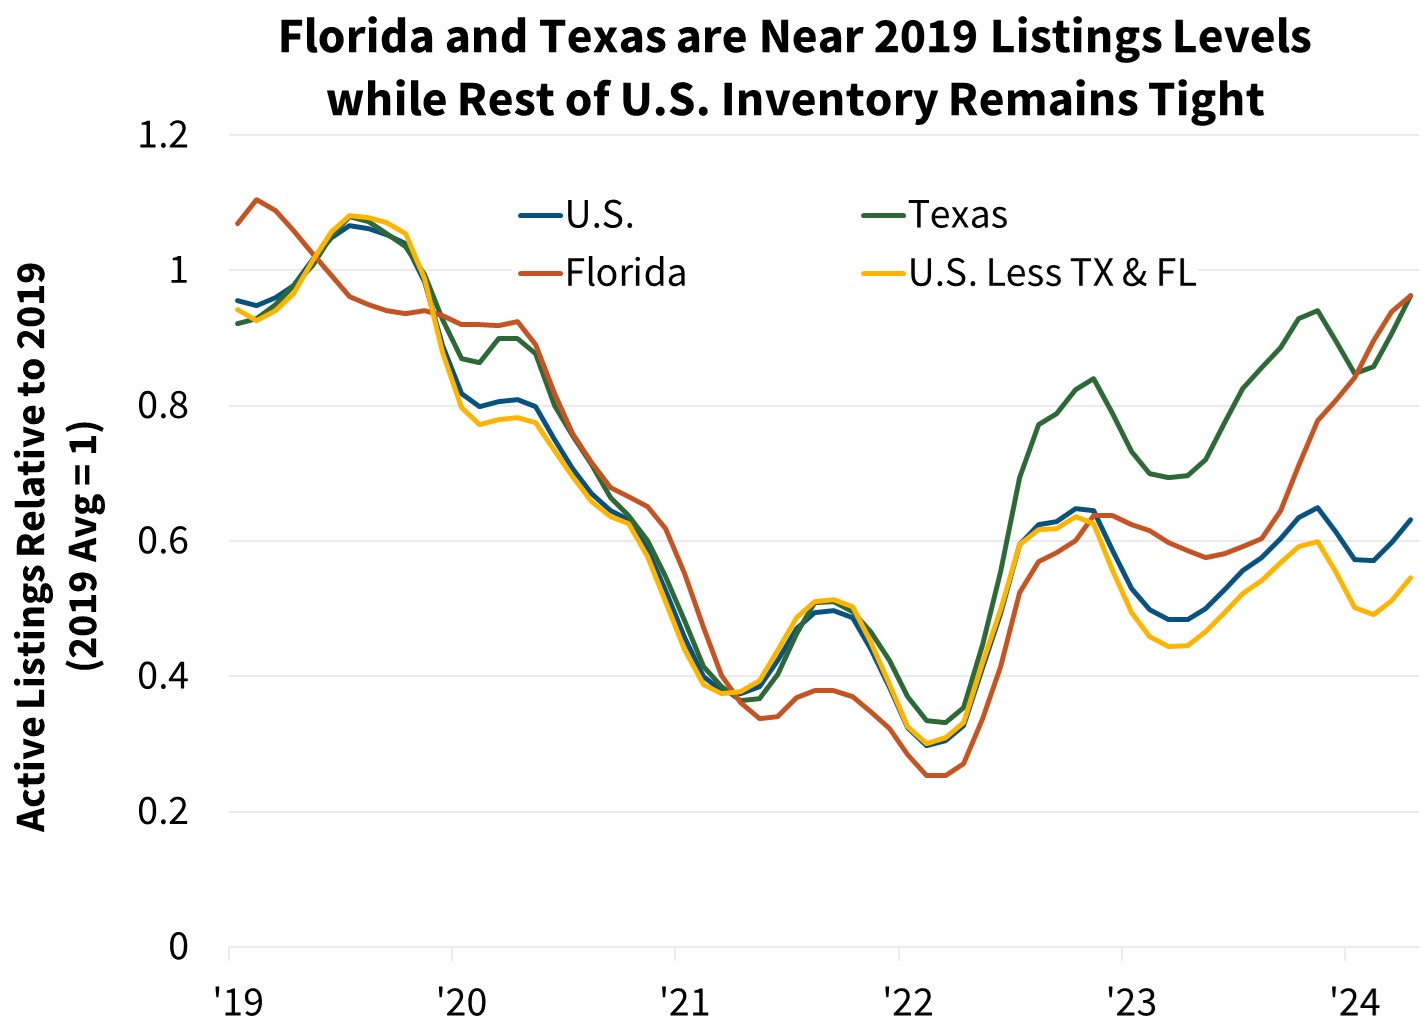 Florida and Texas are Near 2019 Listings Levels while Rest of U.S. Inventory Remains Tight